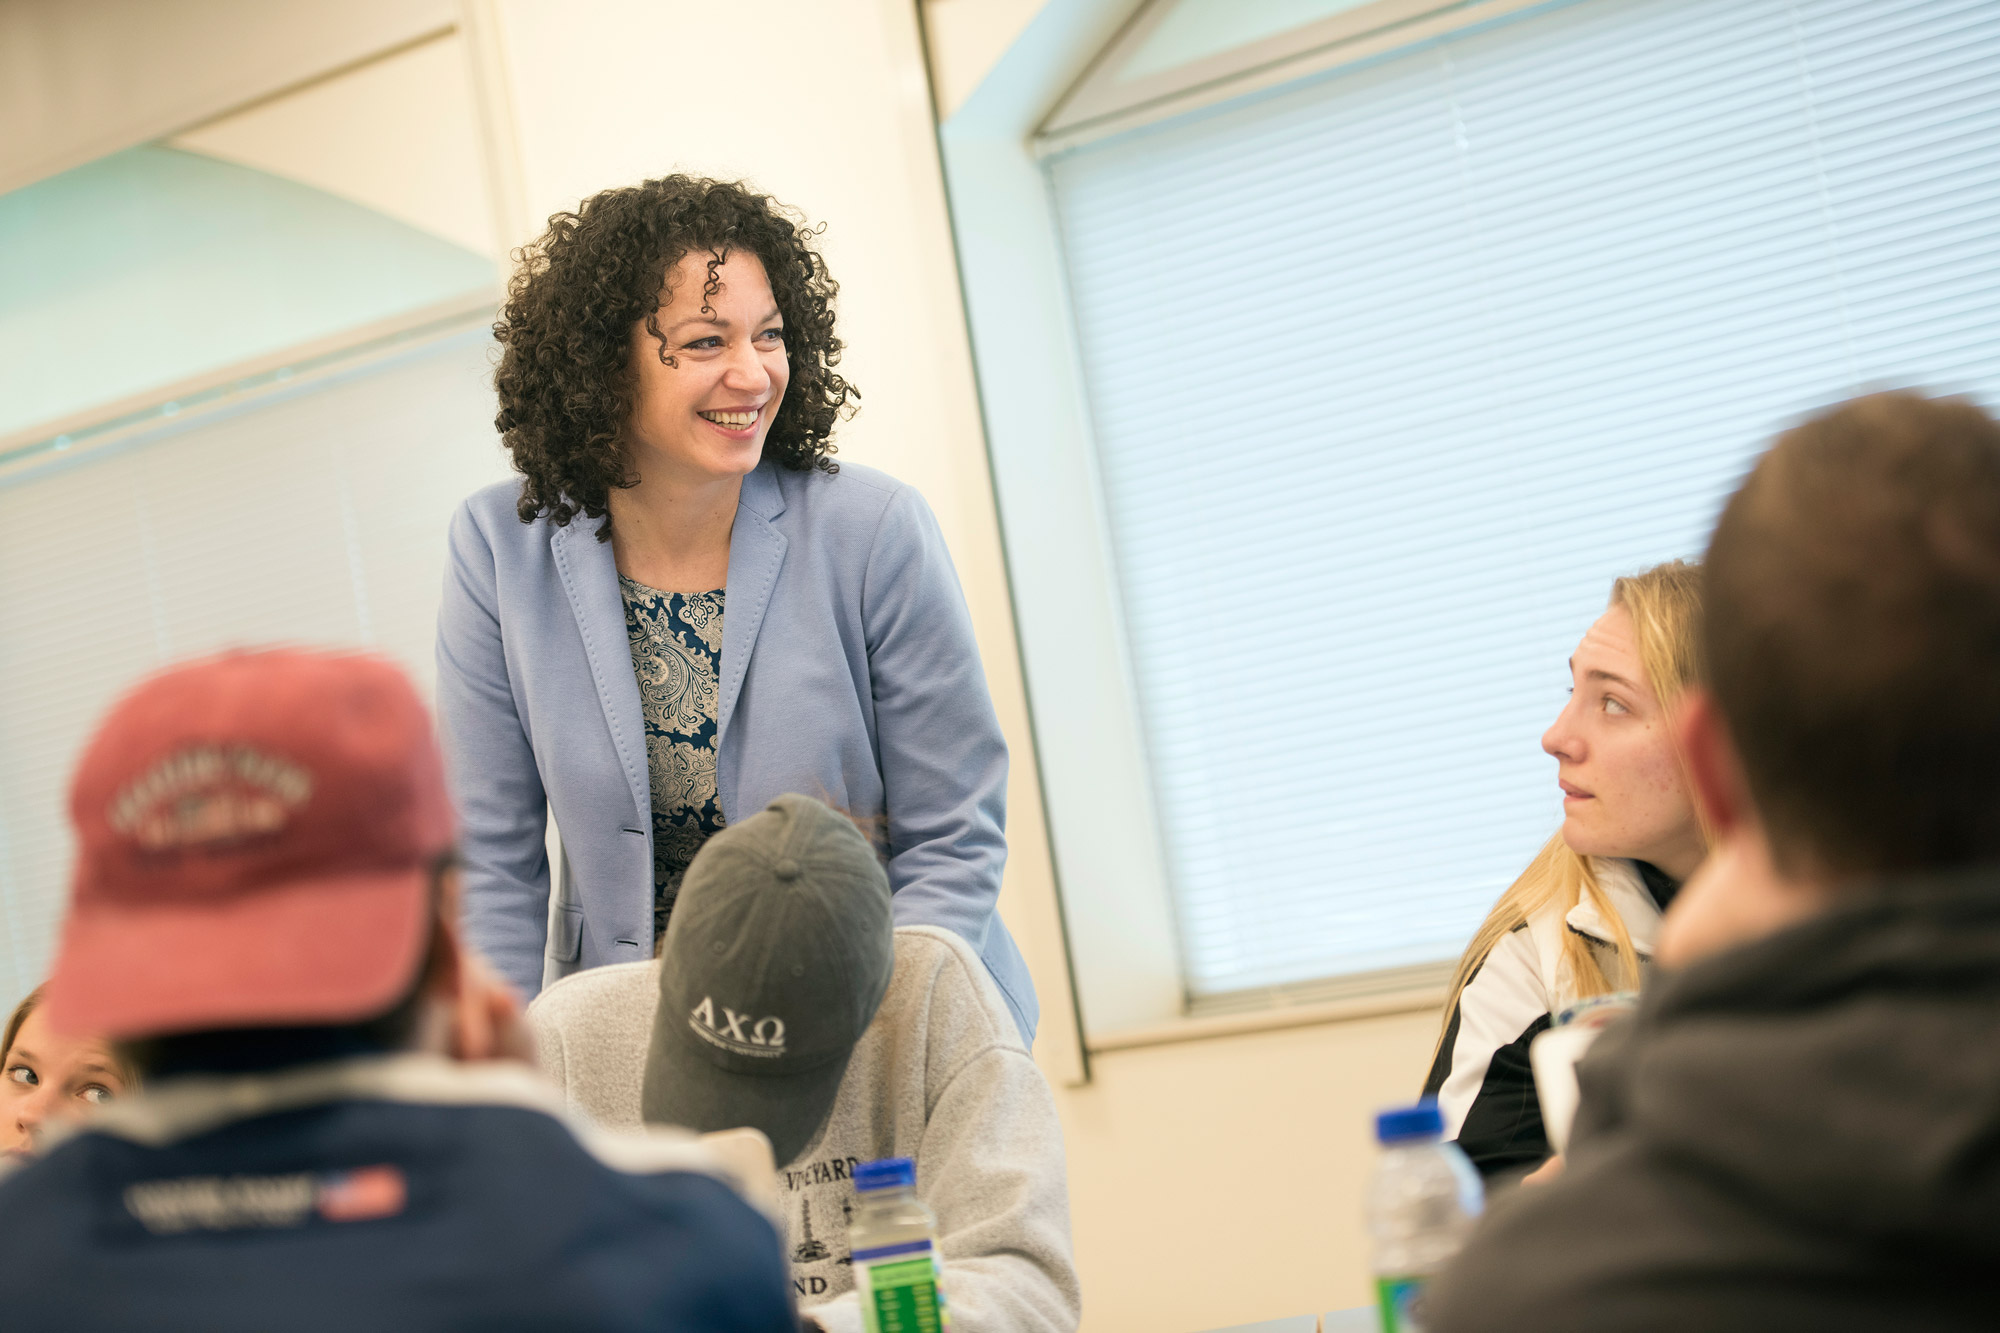 Professor Antoaneta Vanc uses her eclectic global experiences to bring new perspectives to her School of Communications students.